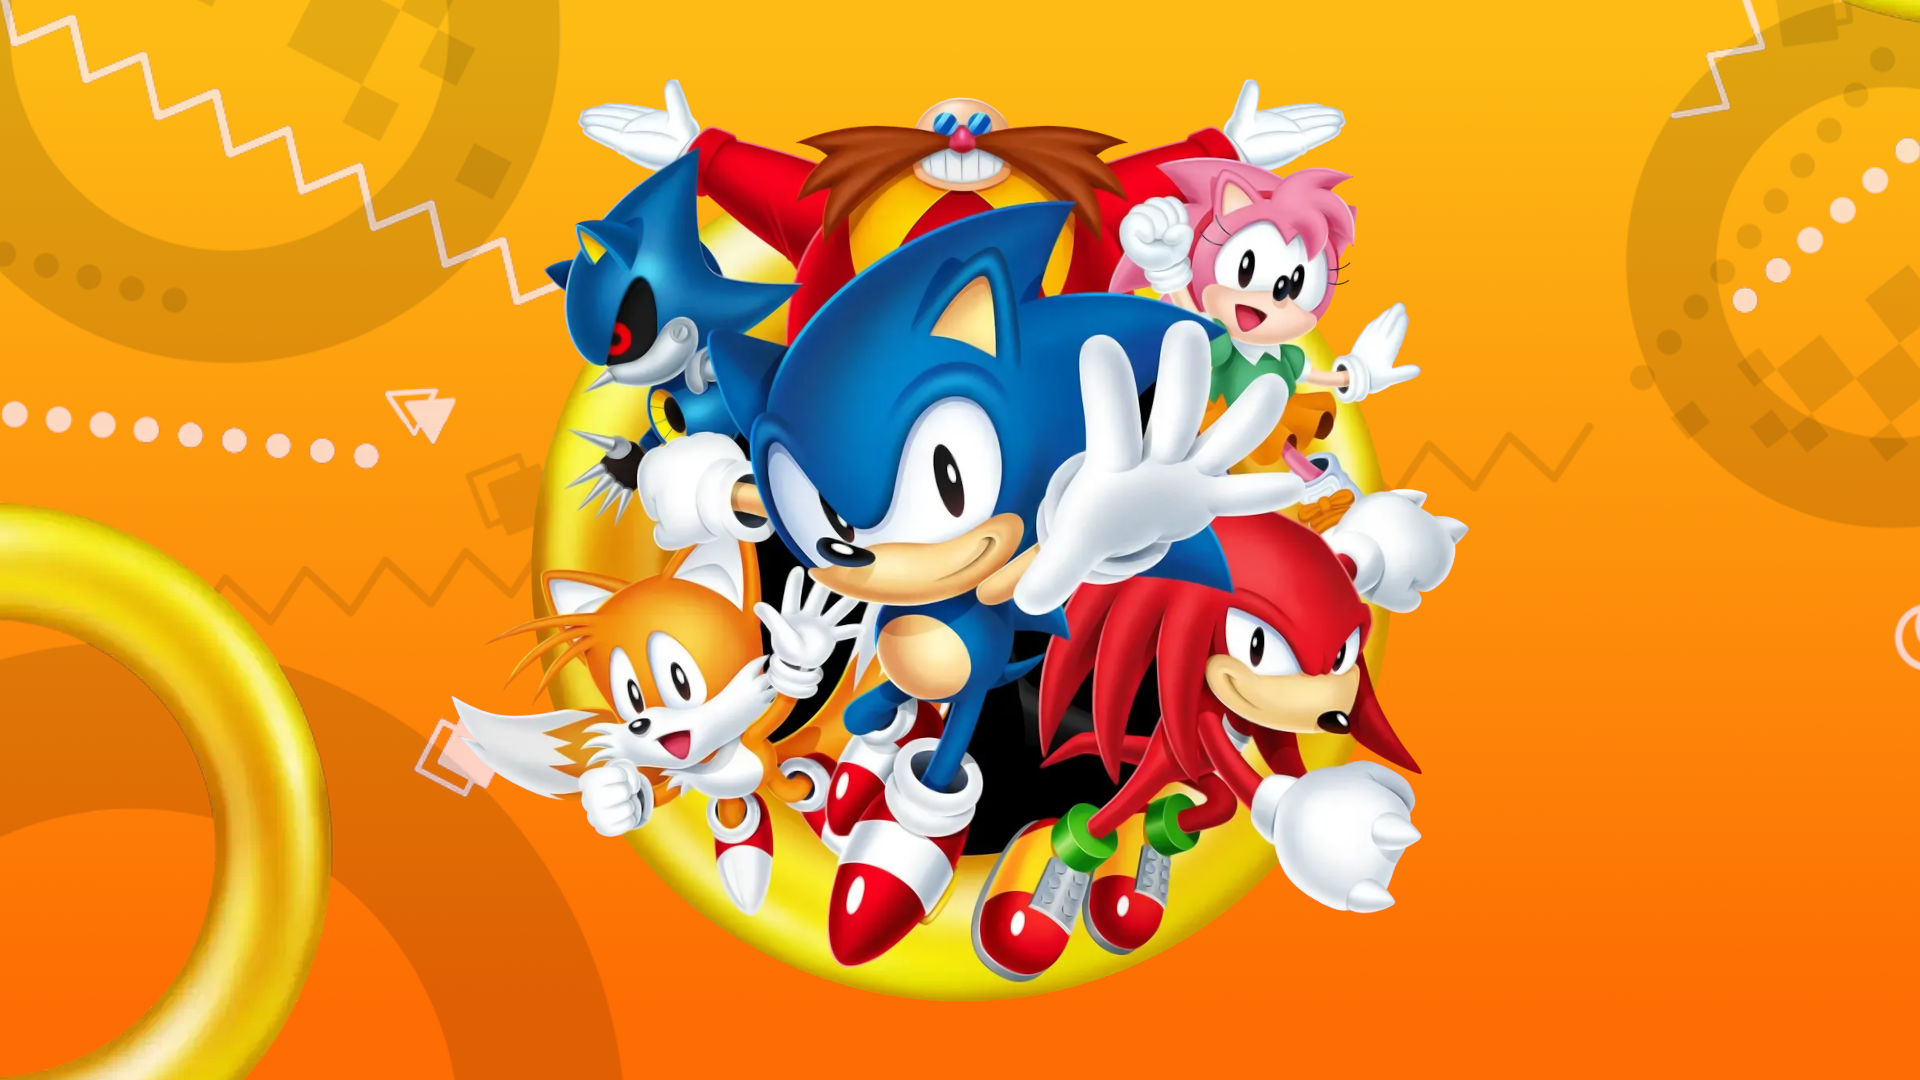 General 1920x1080 Sonic Sonic 2 Sonic 3 sonic origins video game art video game characters Tails (character) Knuckles Amy Rose Dr. Robotnik Metal Sonic 1990s retro games